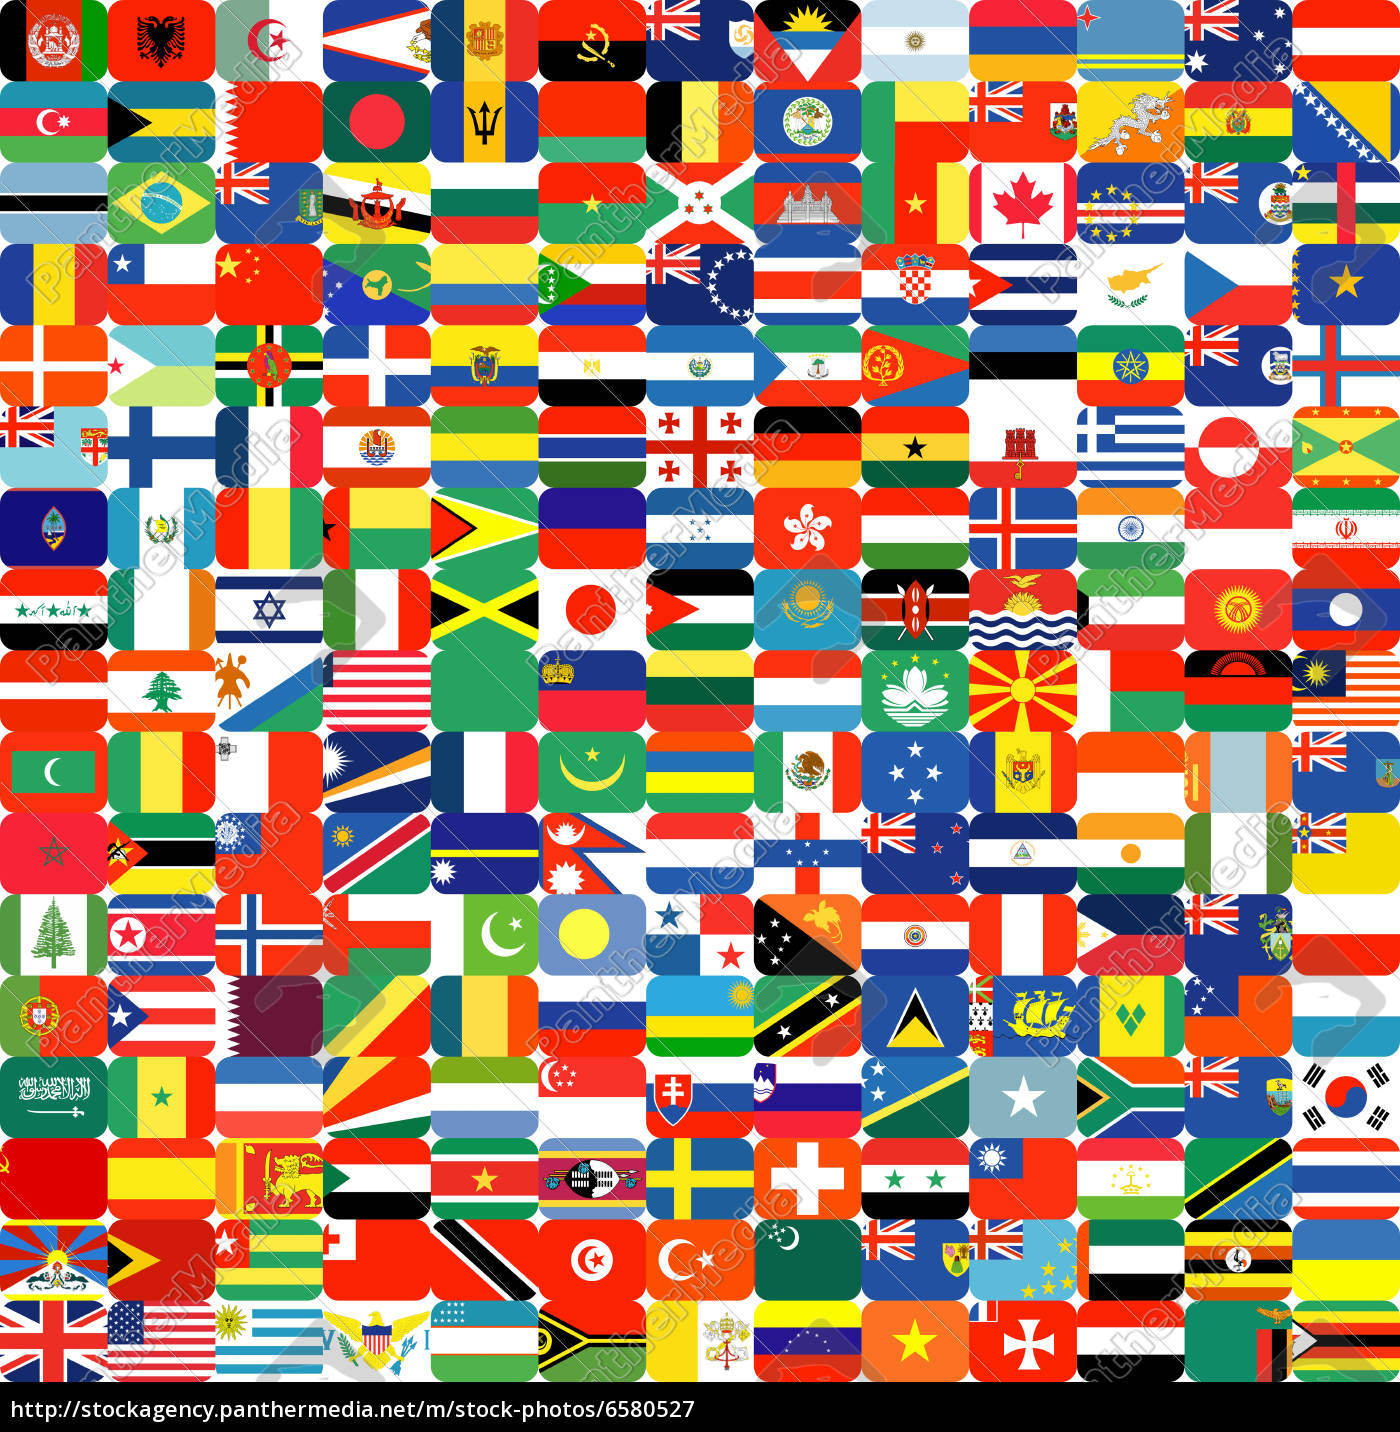 Complete set of Flags Royalty free image 6580527 PantherMedia